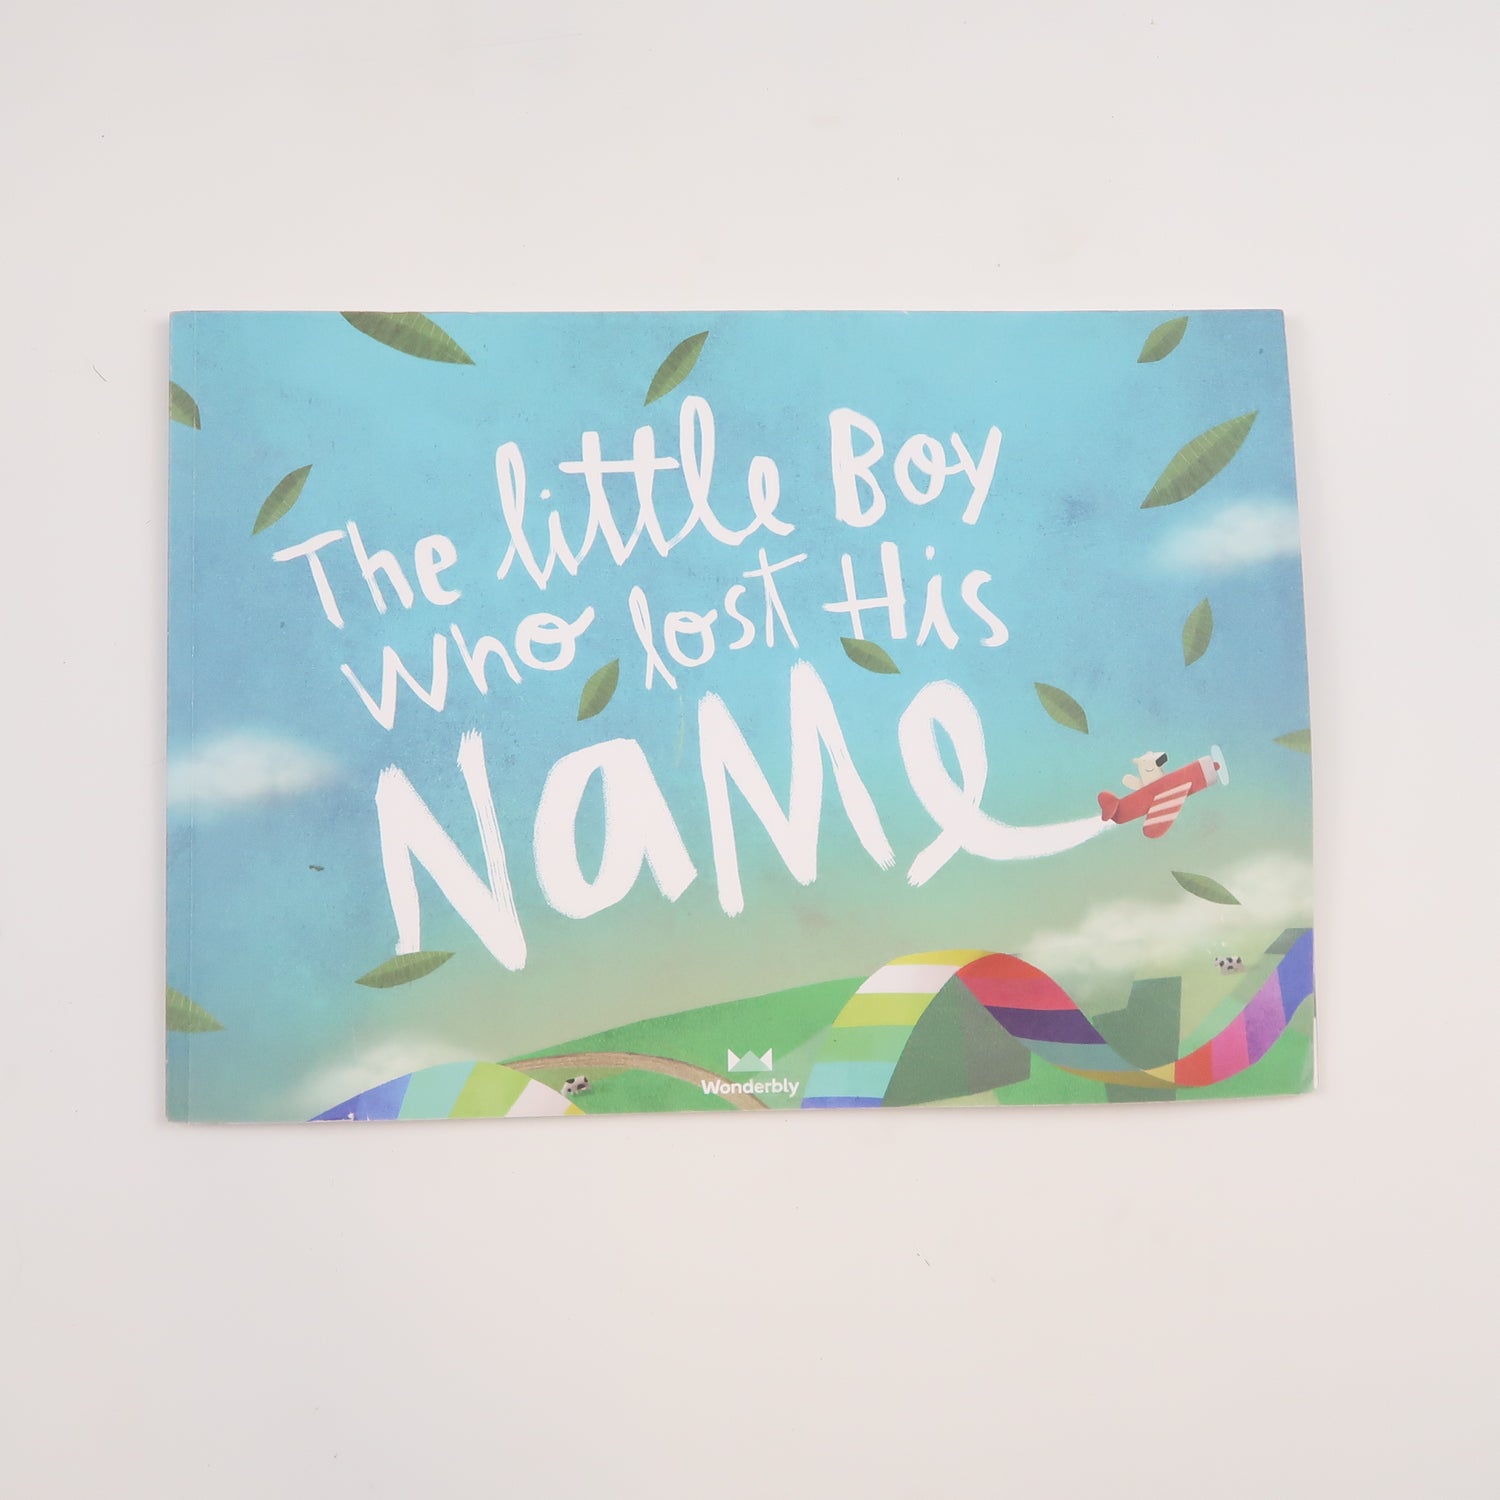 The Little Boy Who Lost His Name (WYATT) - Wonderbly